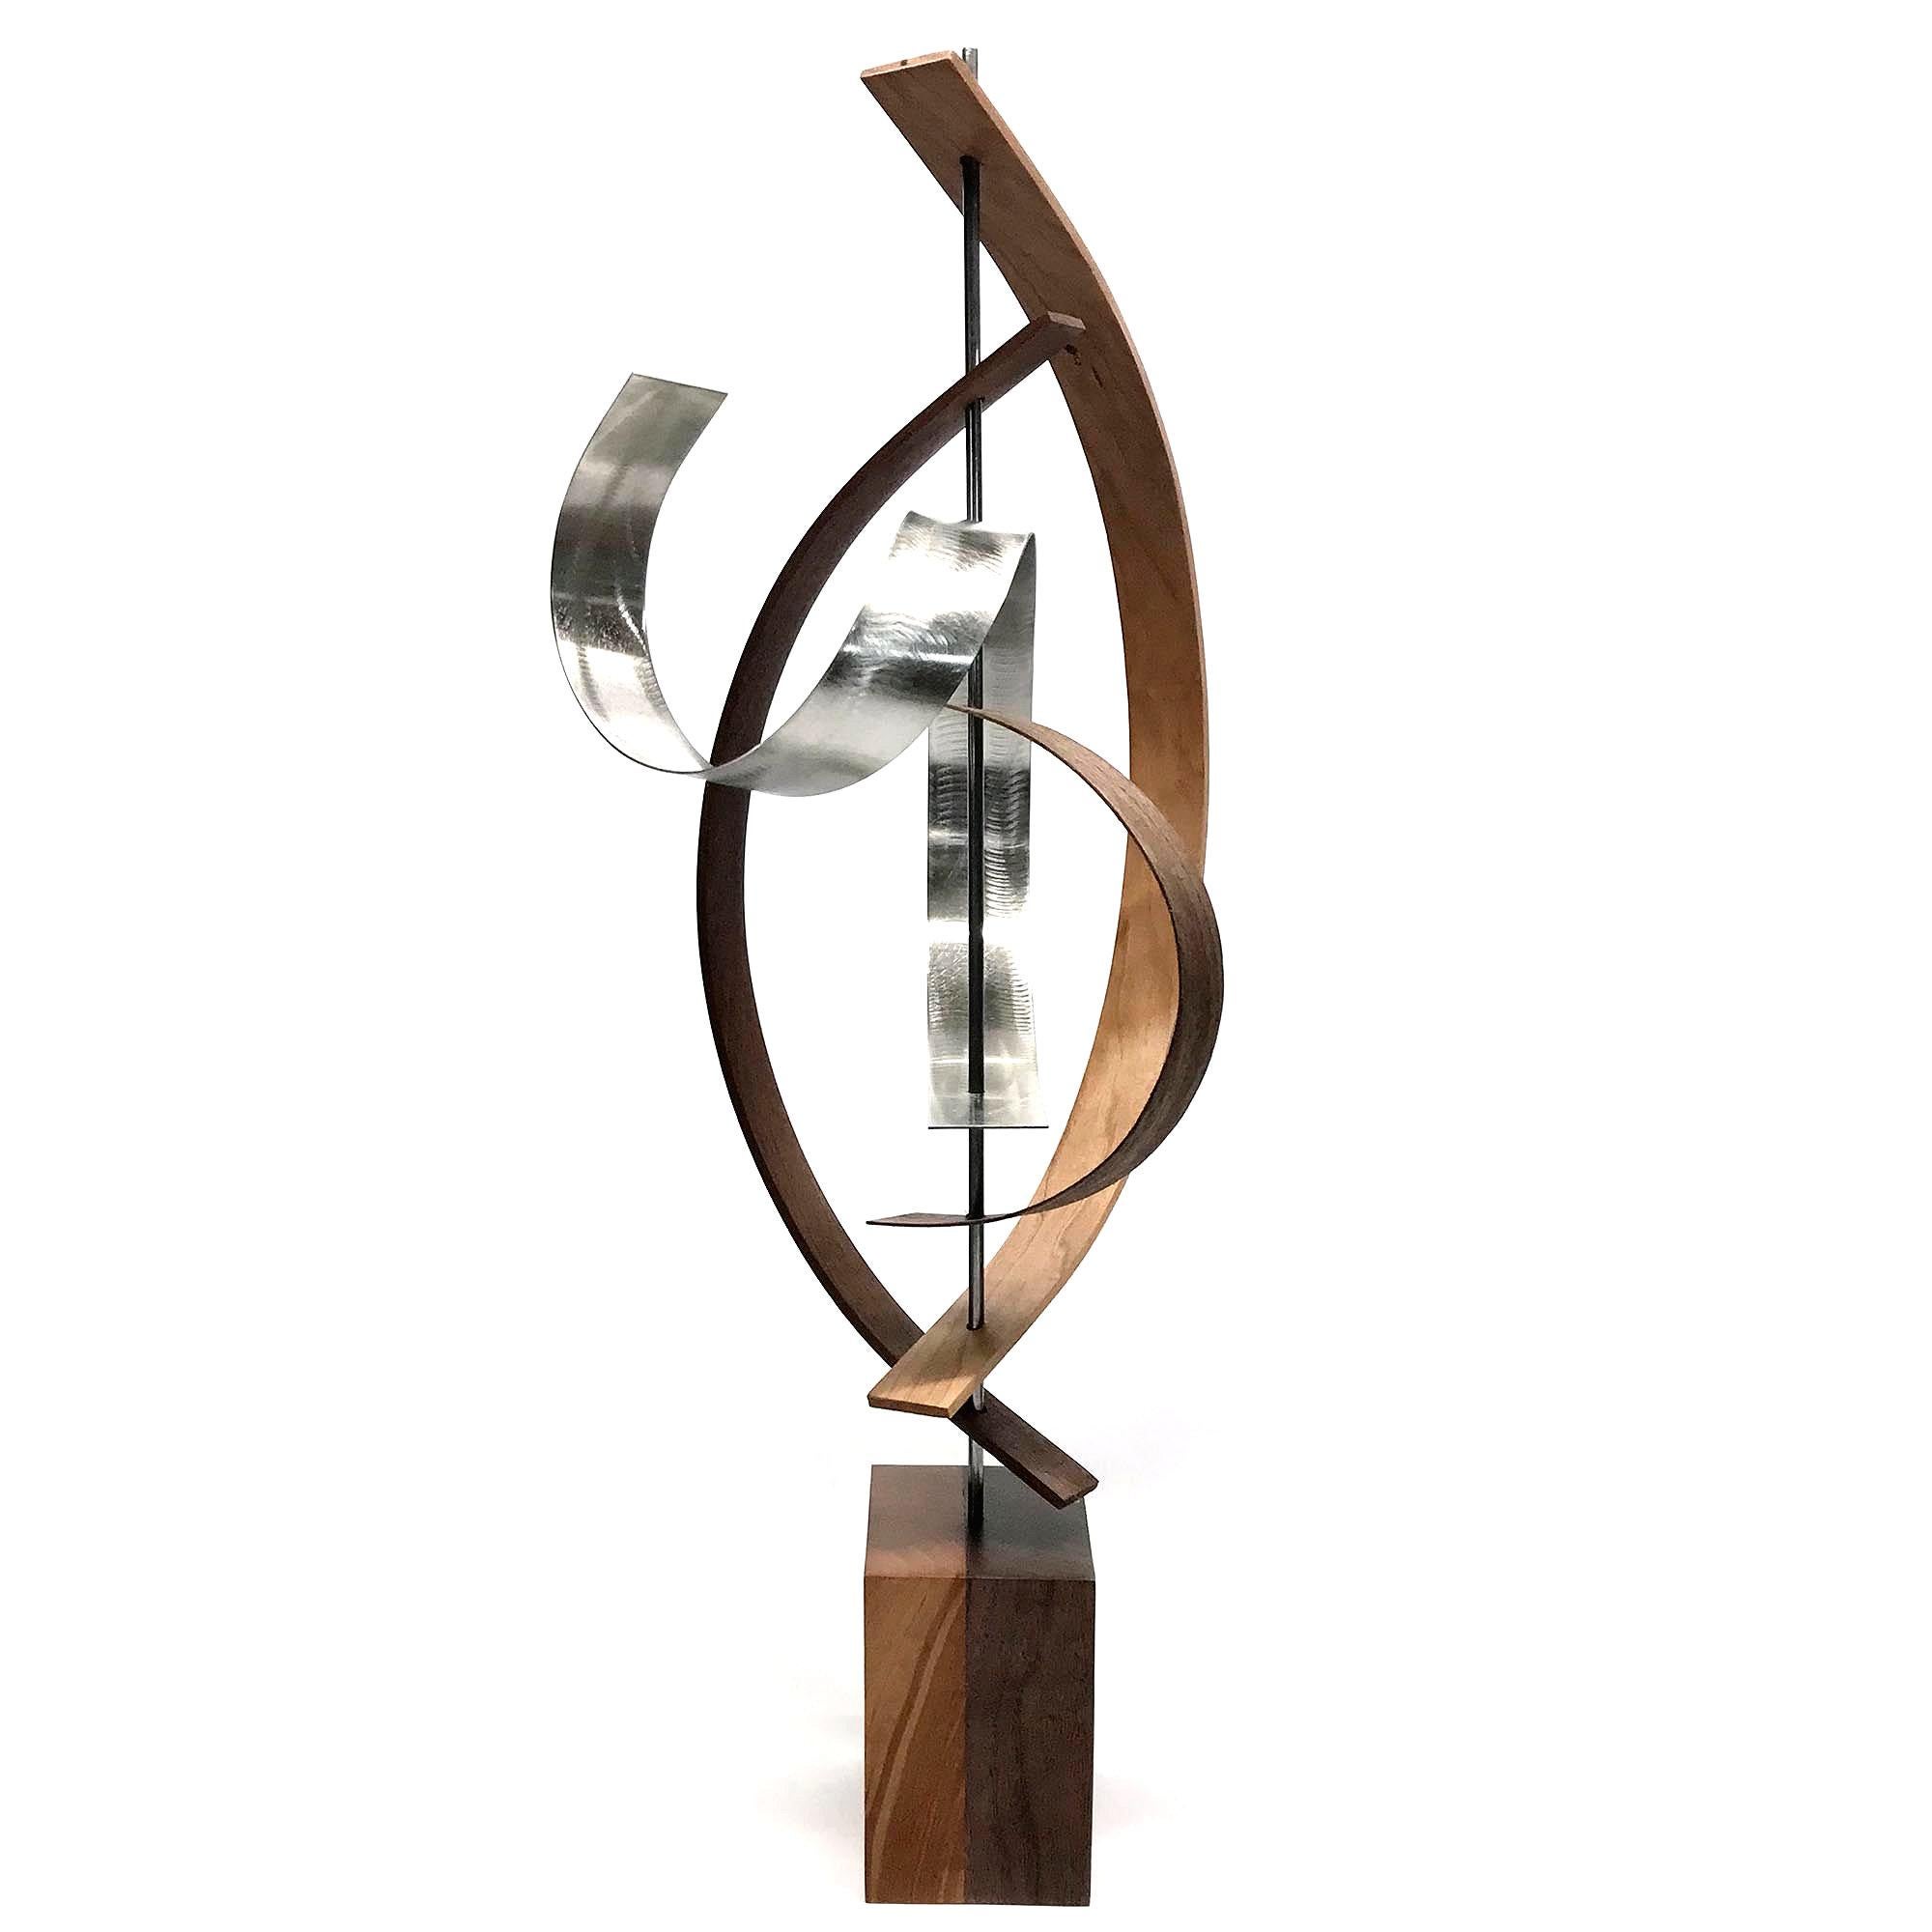 Mid-Century Modern Inspired,  Wood Sculpture, Contemporary Abstract, by Jeff L. 1